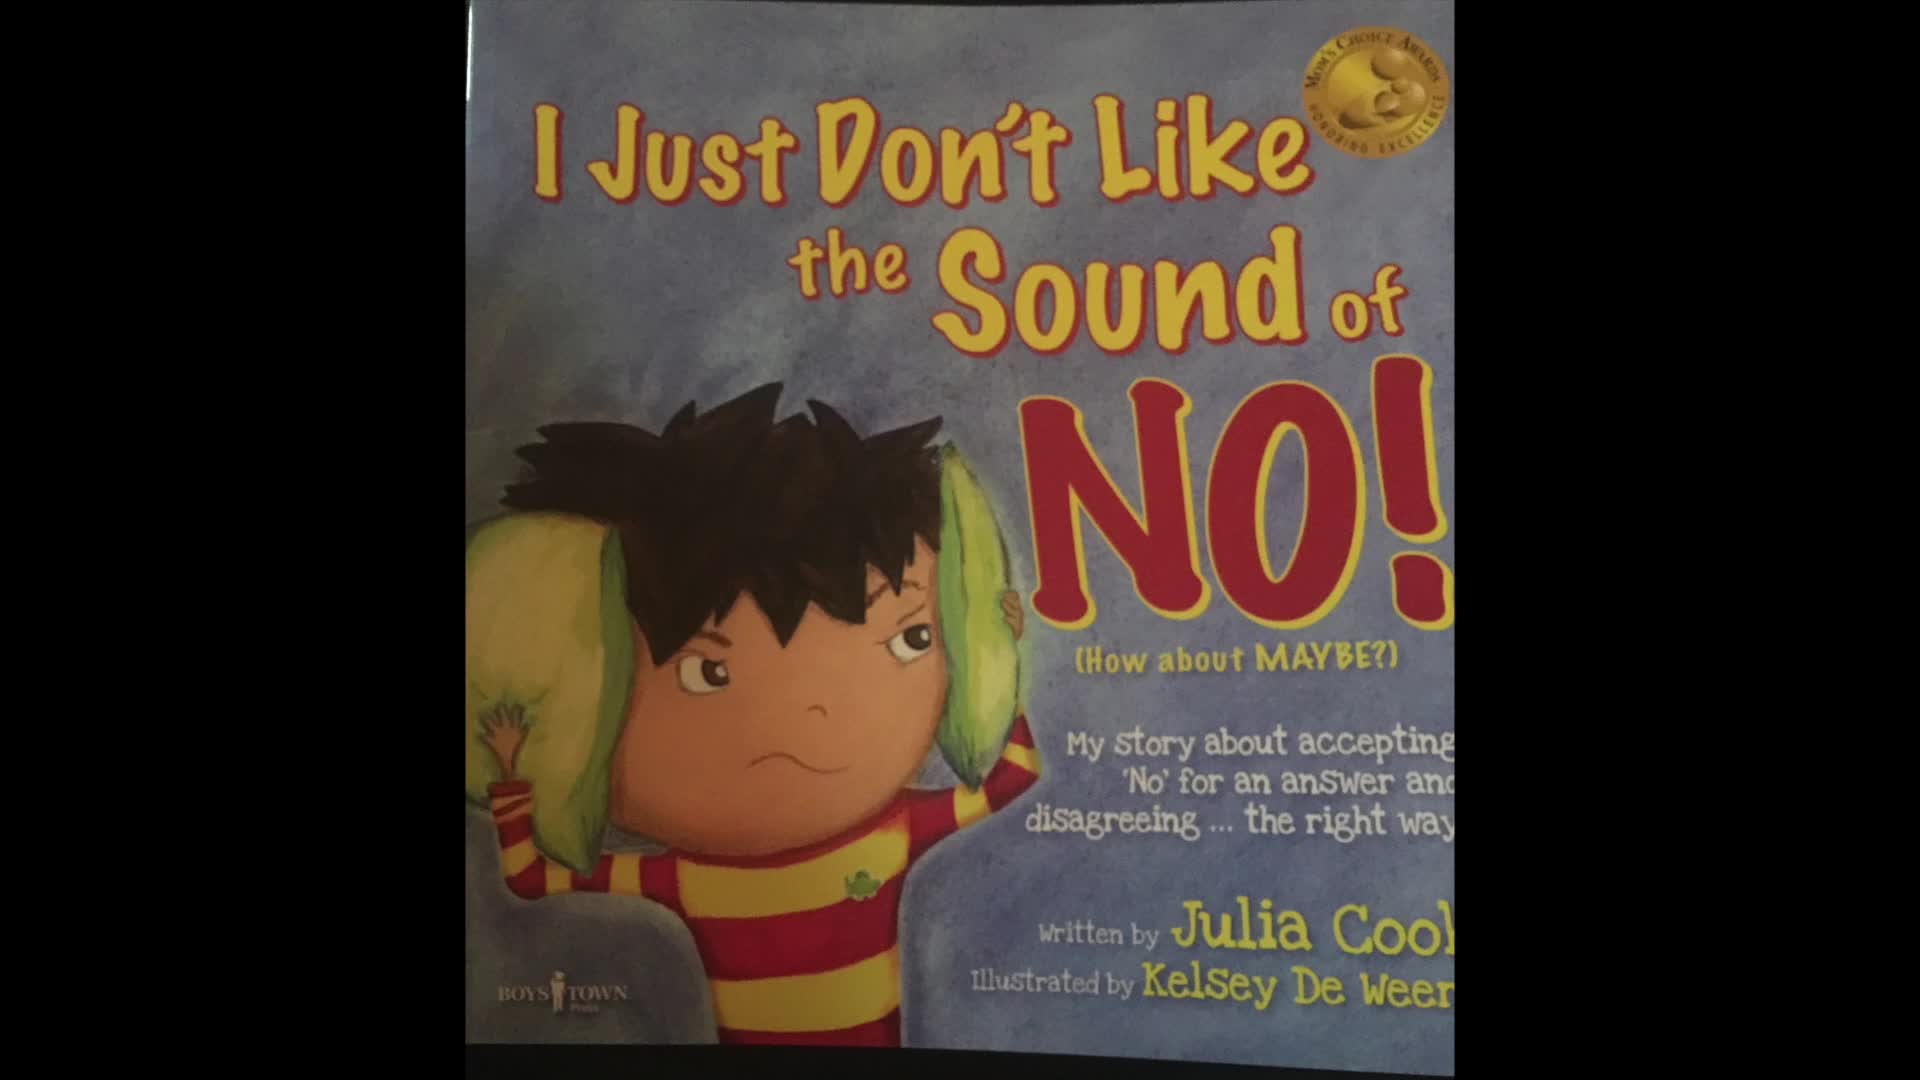 I Just Don't Like the Sound of No!